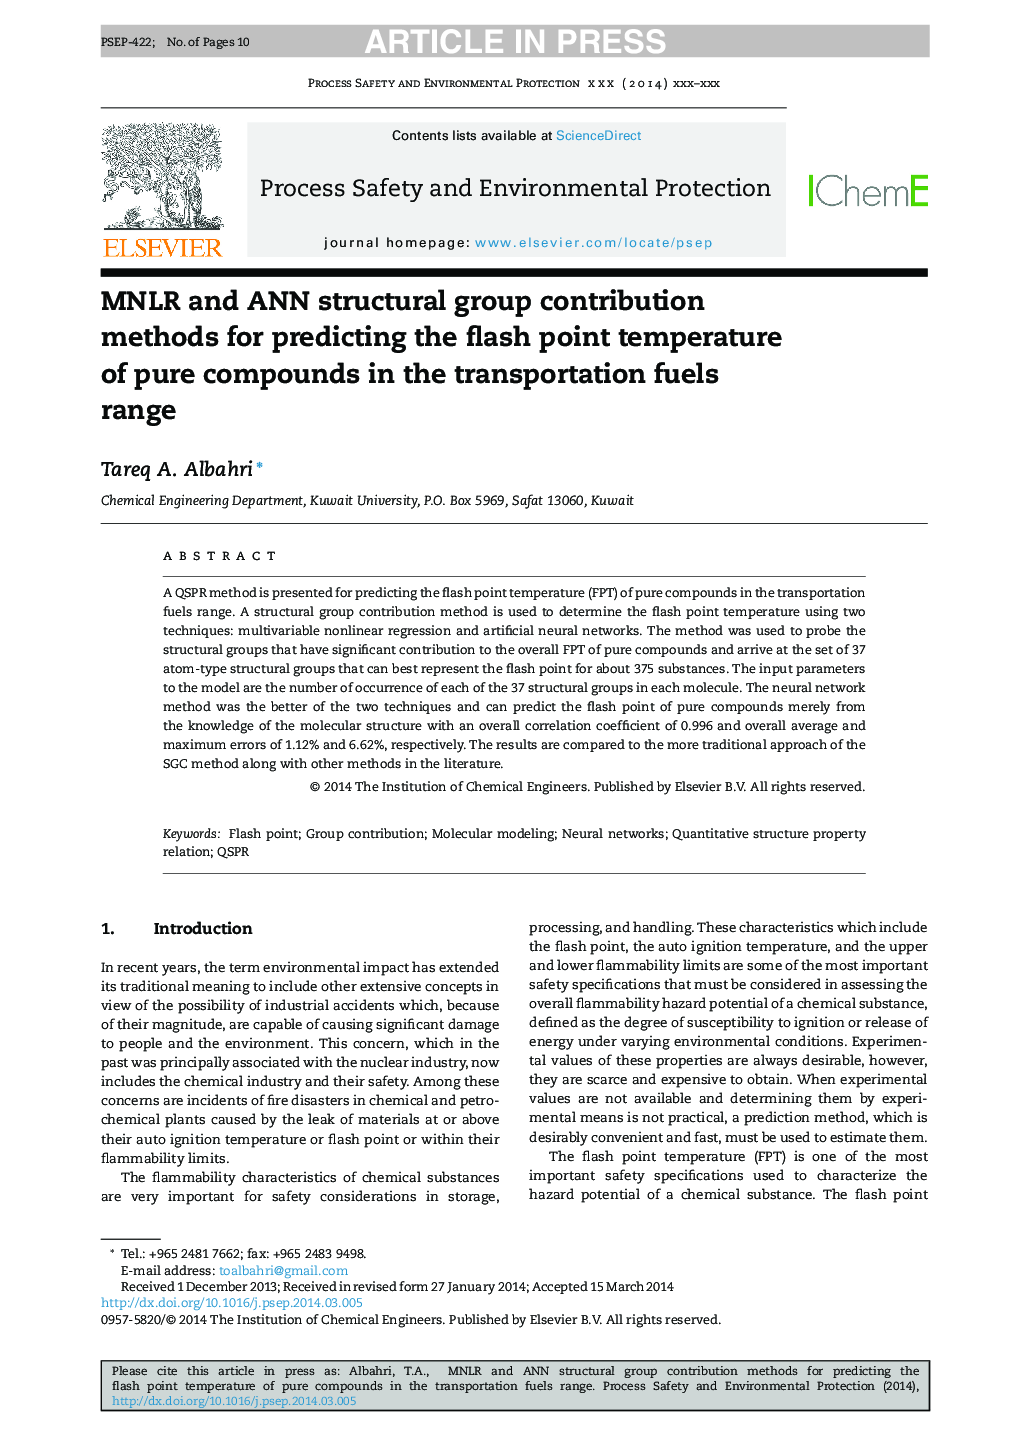 MNLR and ANN structural group contribution methods for predicting the flash point temperature of pure compounds in the transportation fuels range